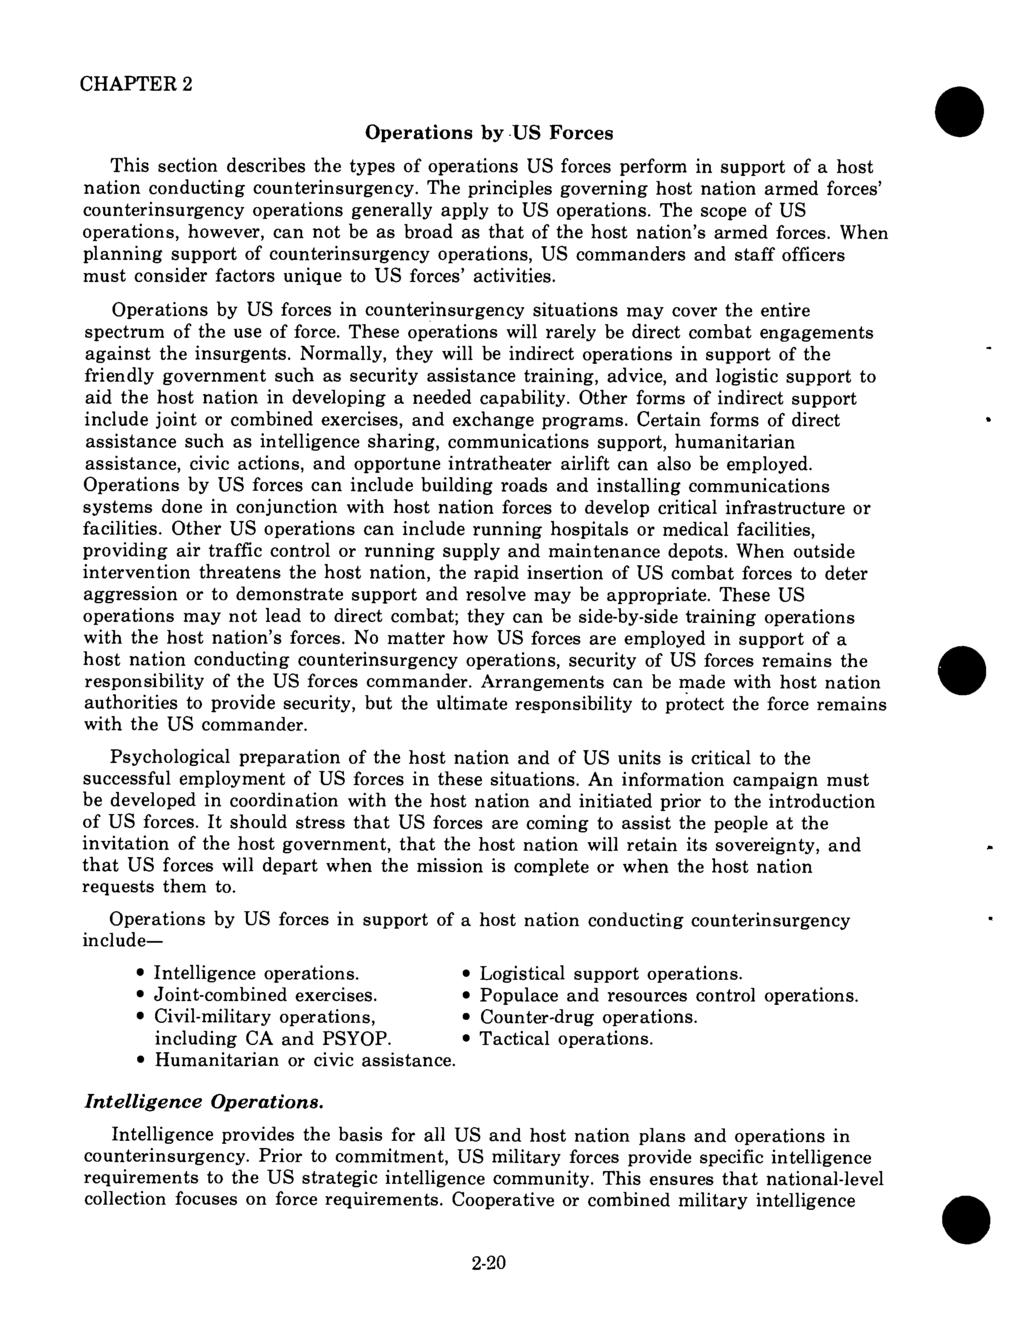 CHAPTER 2 Operations by US Forces This section describes the types of operations US forces perform in support of a host nation conducting counterinsurgency.